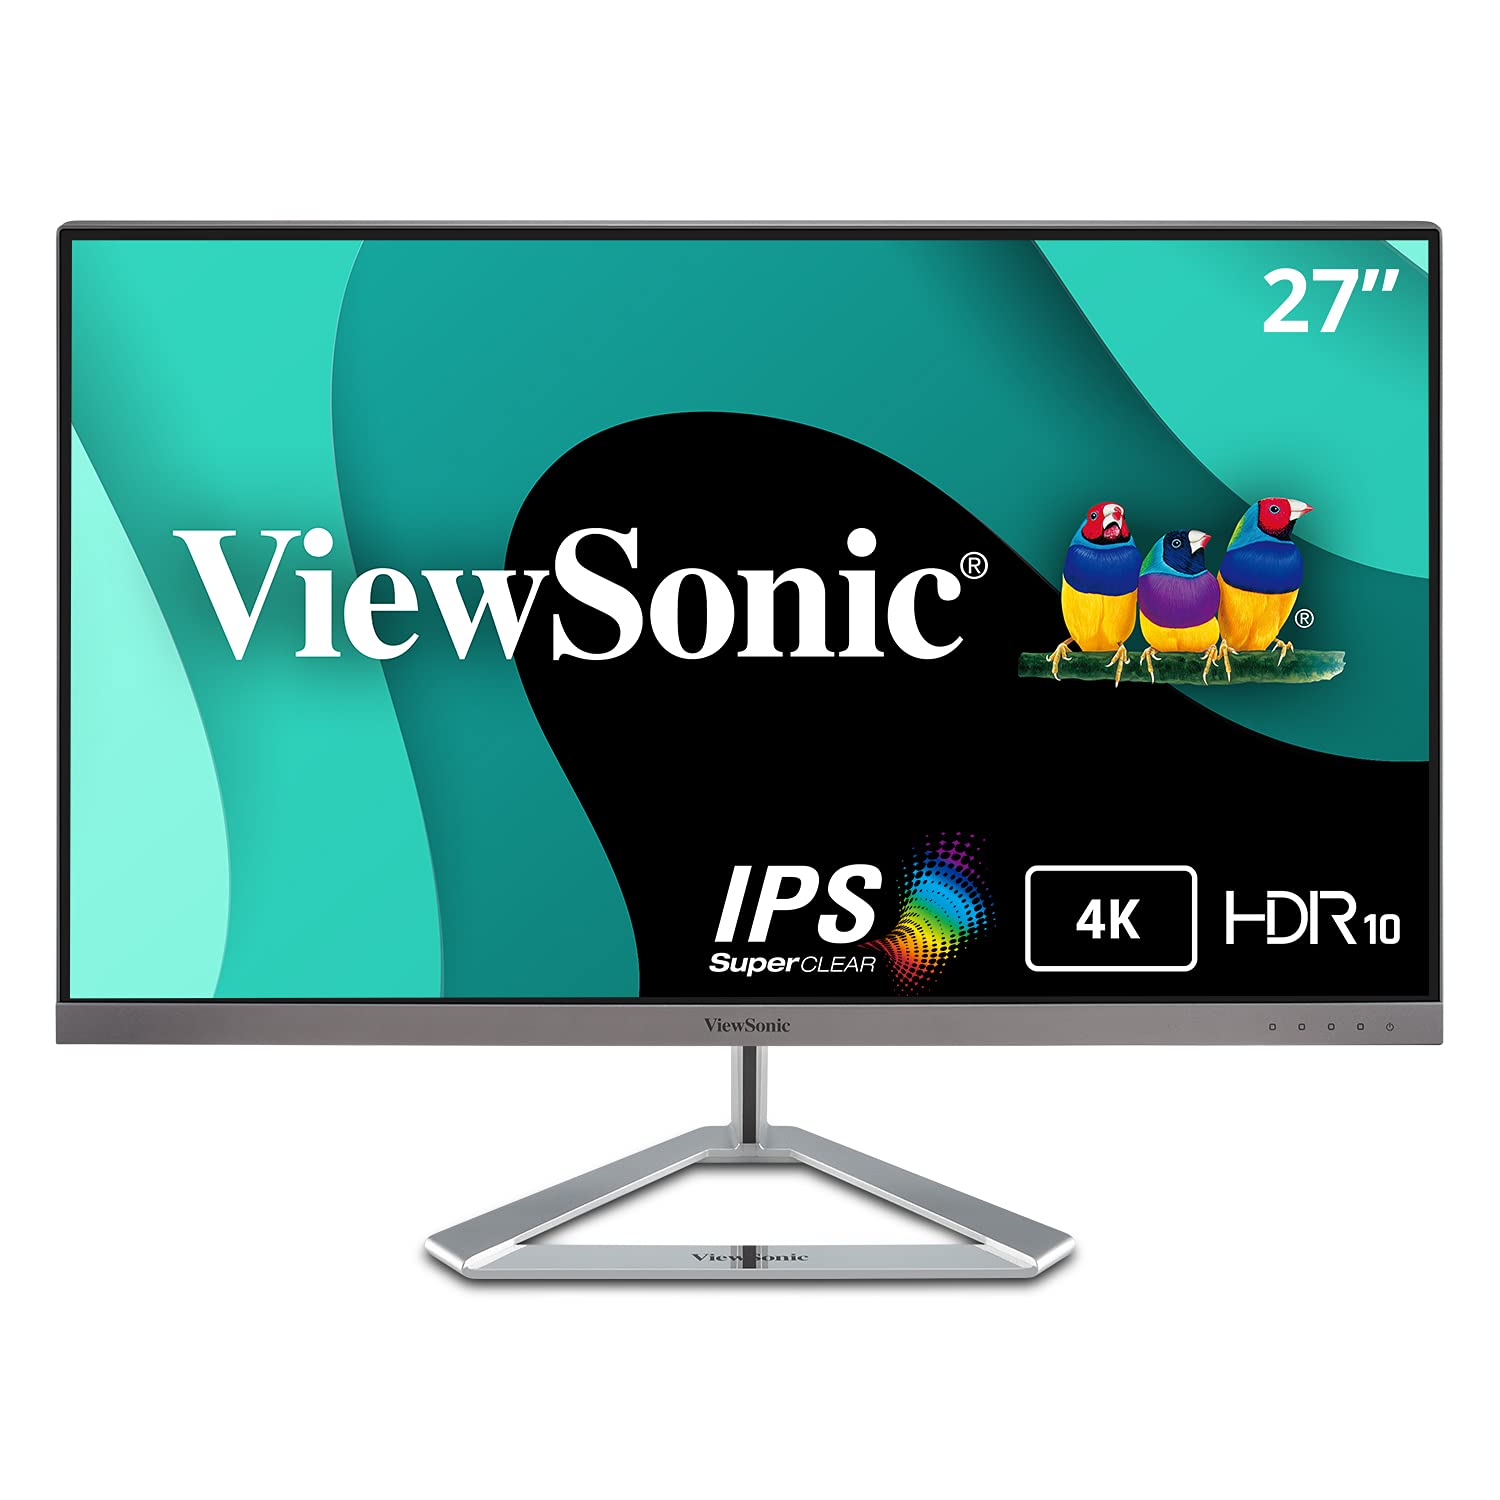 ViewSonic VX2776-4K-MHD 27 Inch 4K UHD Frameless IPS Monitor with HDR10 HDMI and DisplayPort for Home and Office (Renewed)